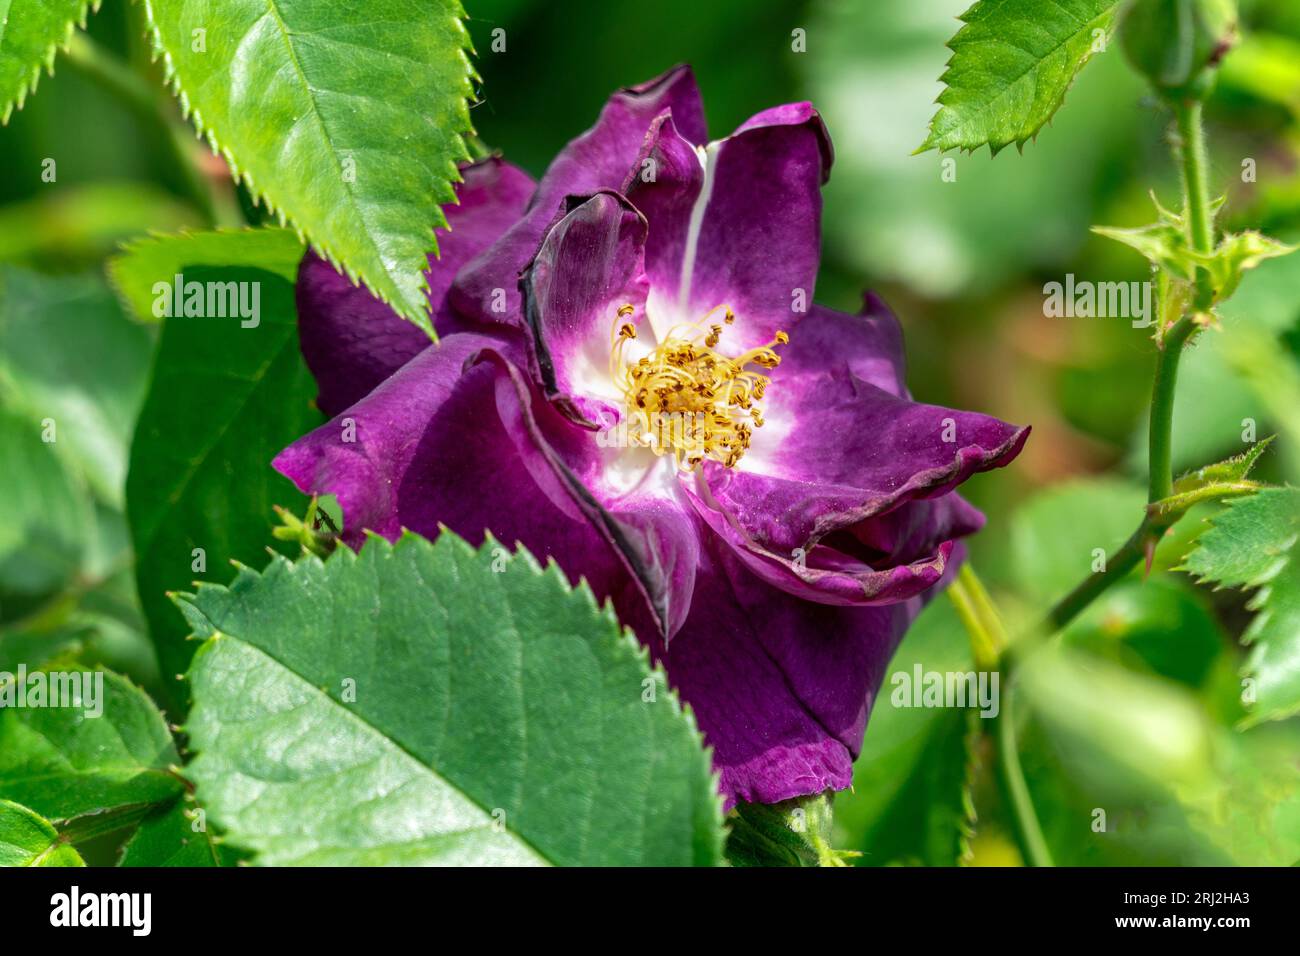 Blooming Rhapsody in BLue rose Stock Photo